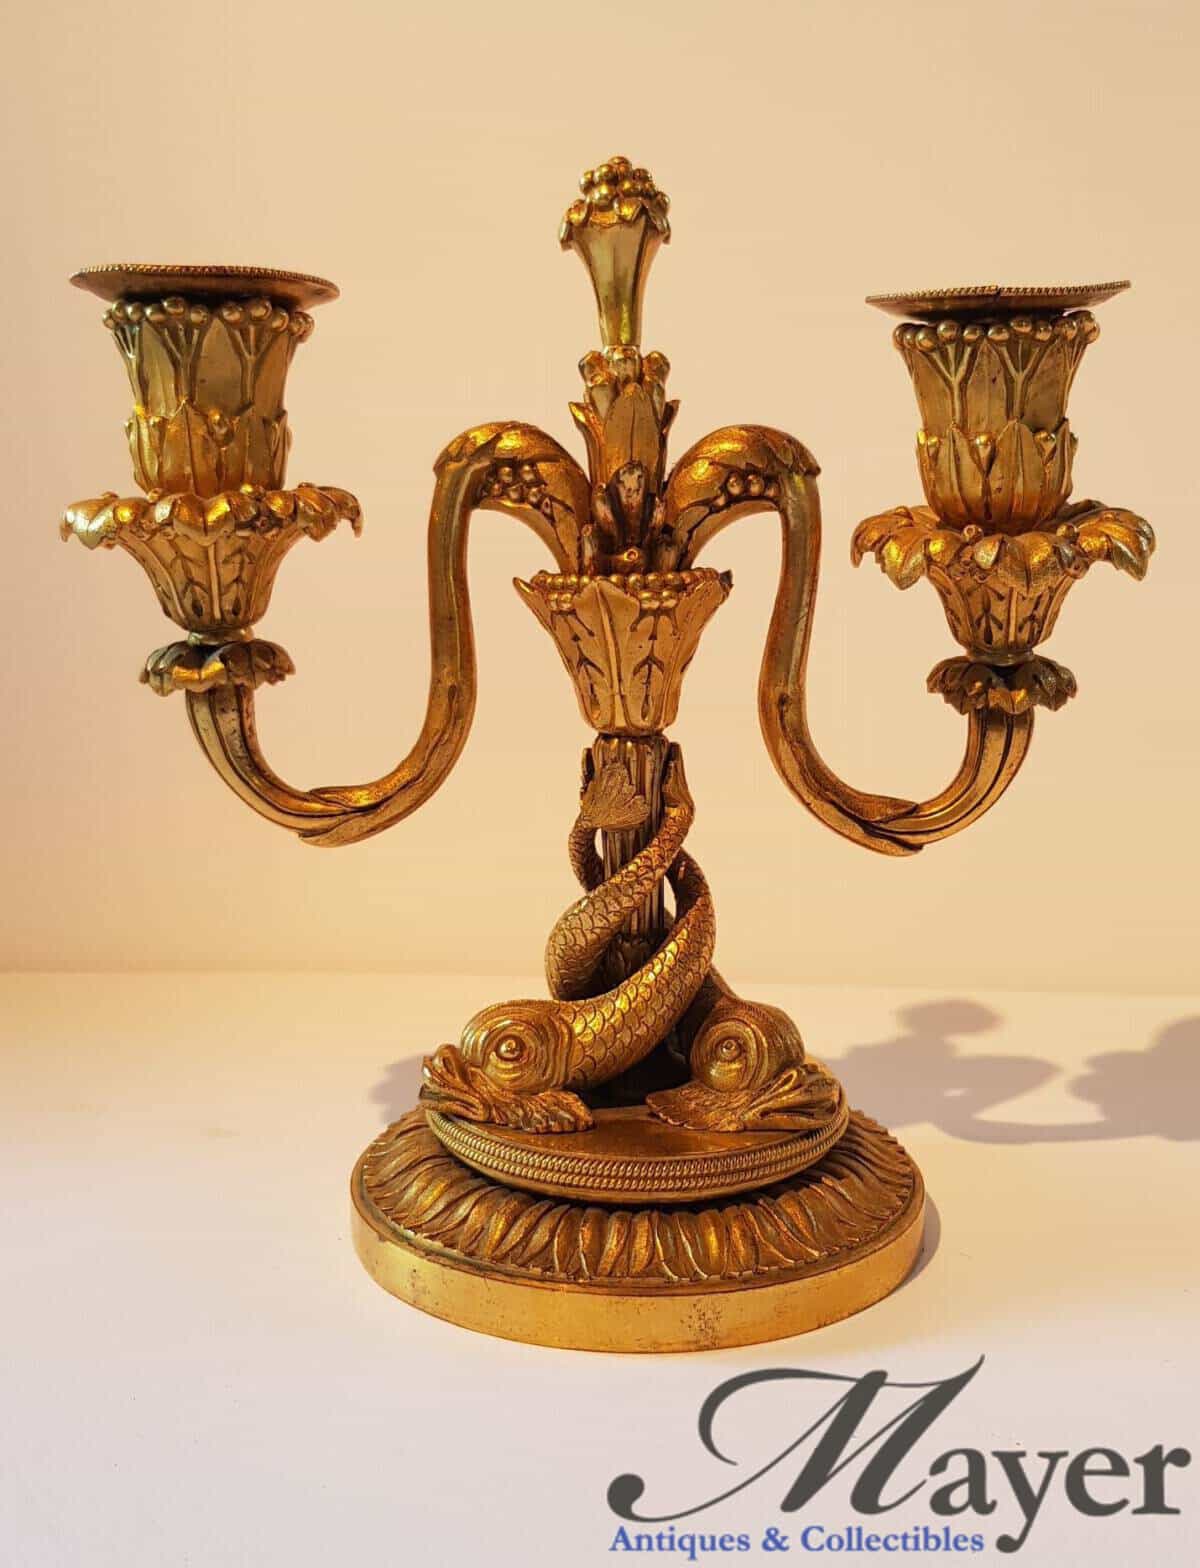 Antique candelabra with two branches